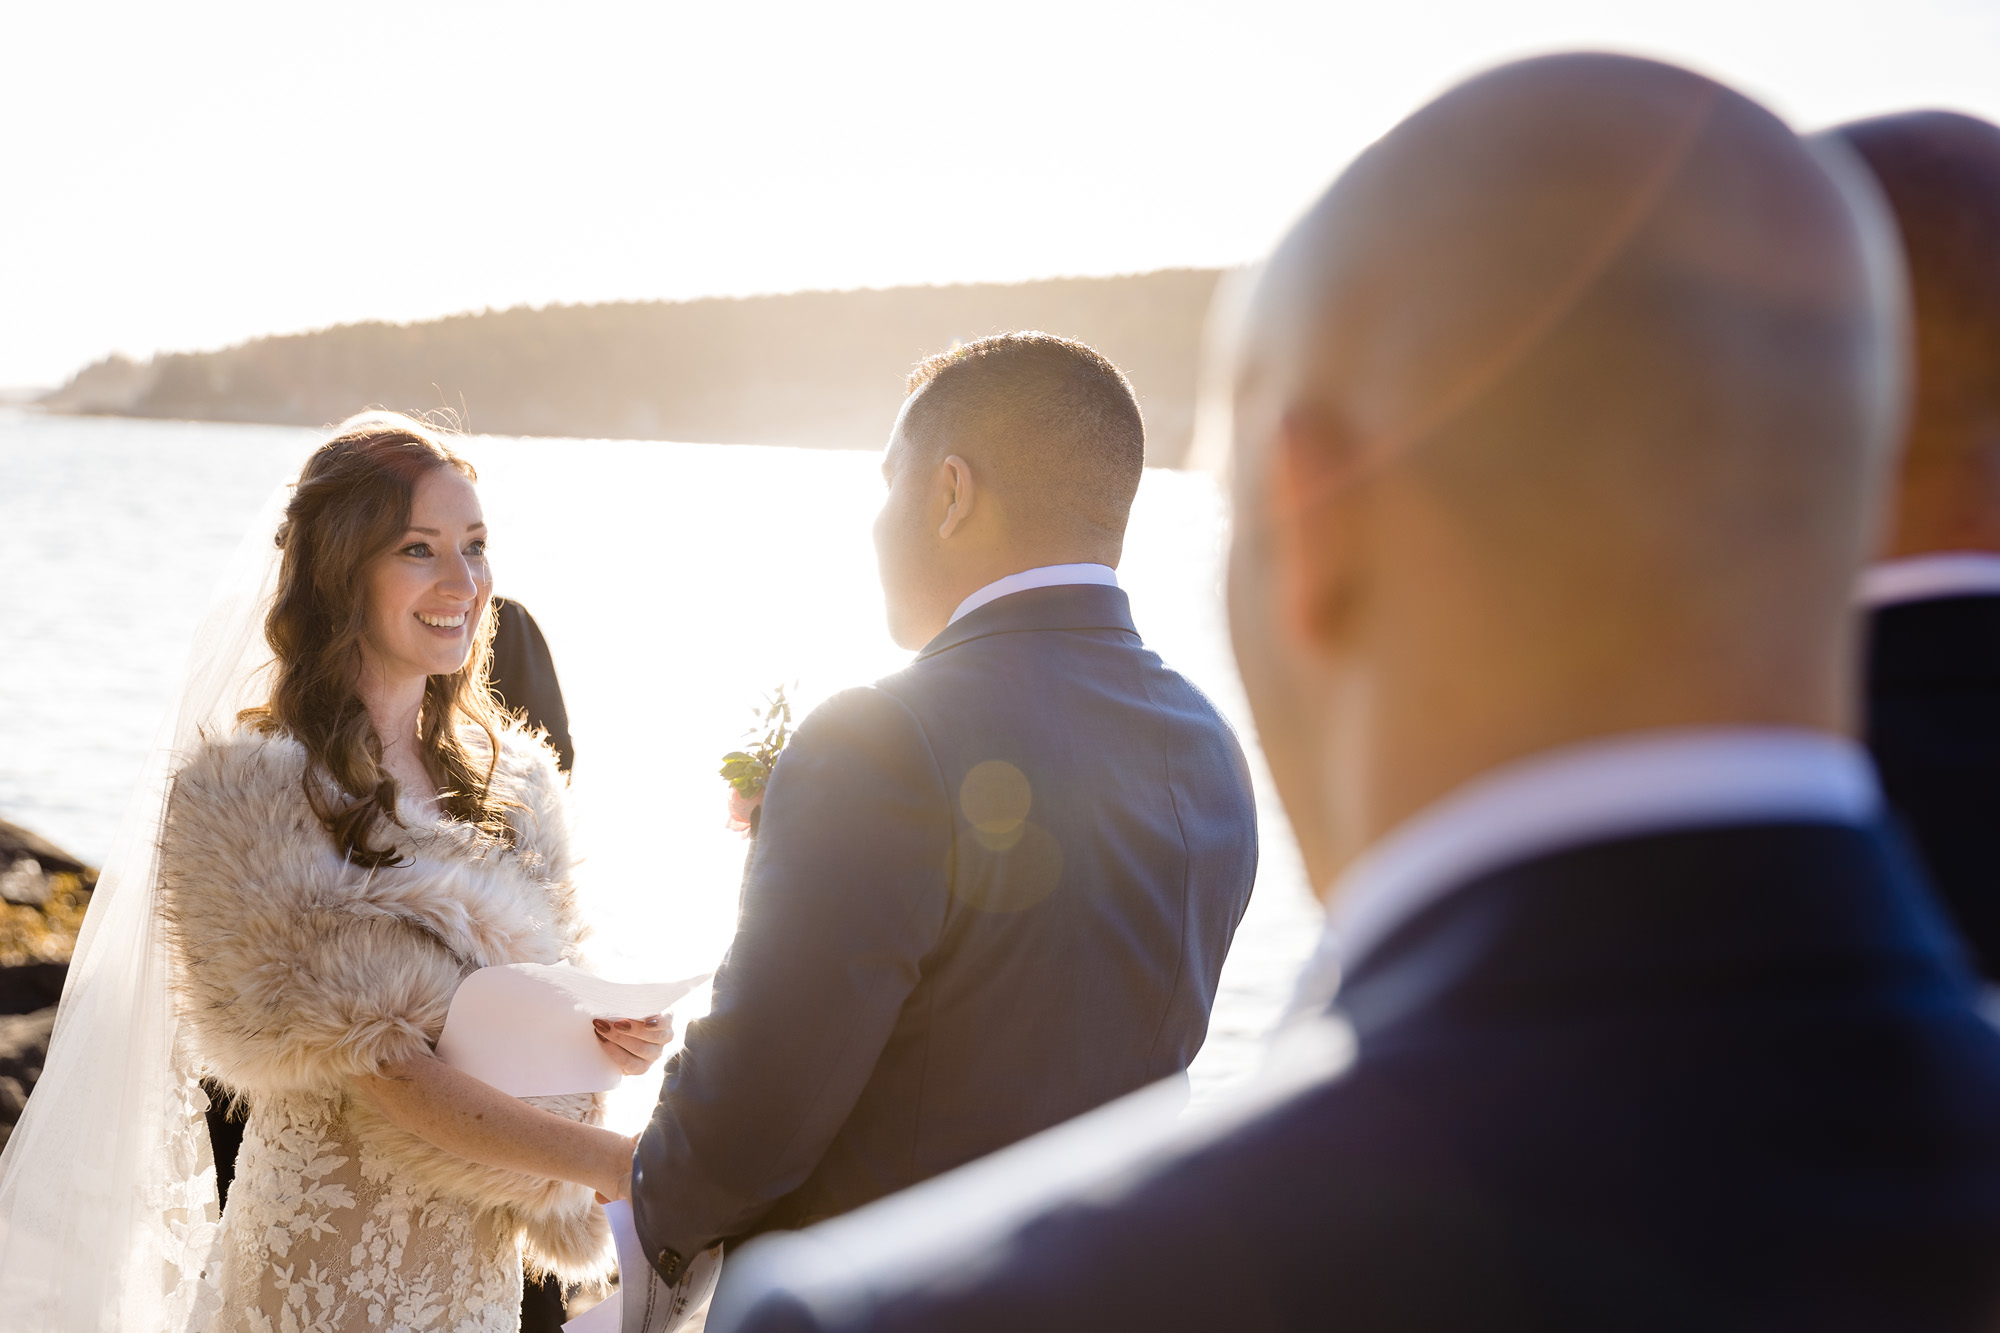 An elopement ceremony on the cliffs in Acadia National Park